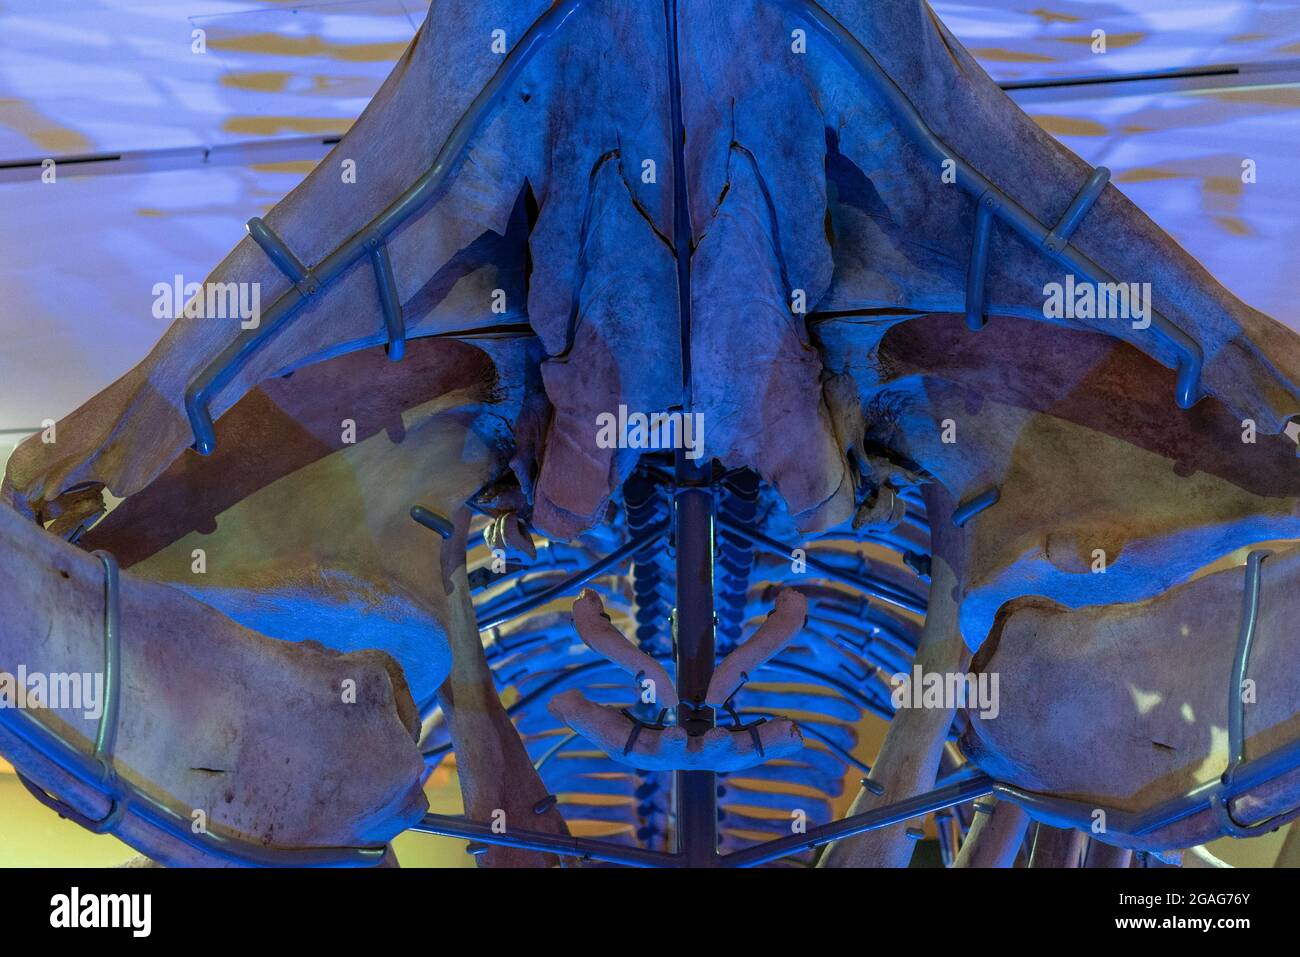 Skelett eines Alasuwinu-Wals im Royal Ontario Museum (ROM) als Teil der Ausstellung "Great Whales: Up Close and Personal" in Toronto, C Stockfoto